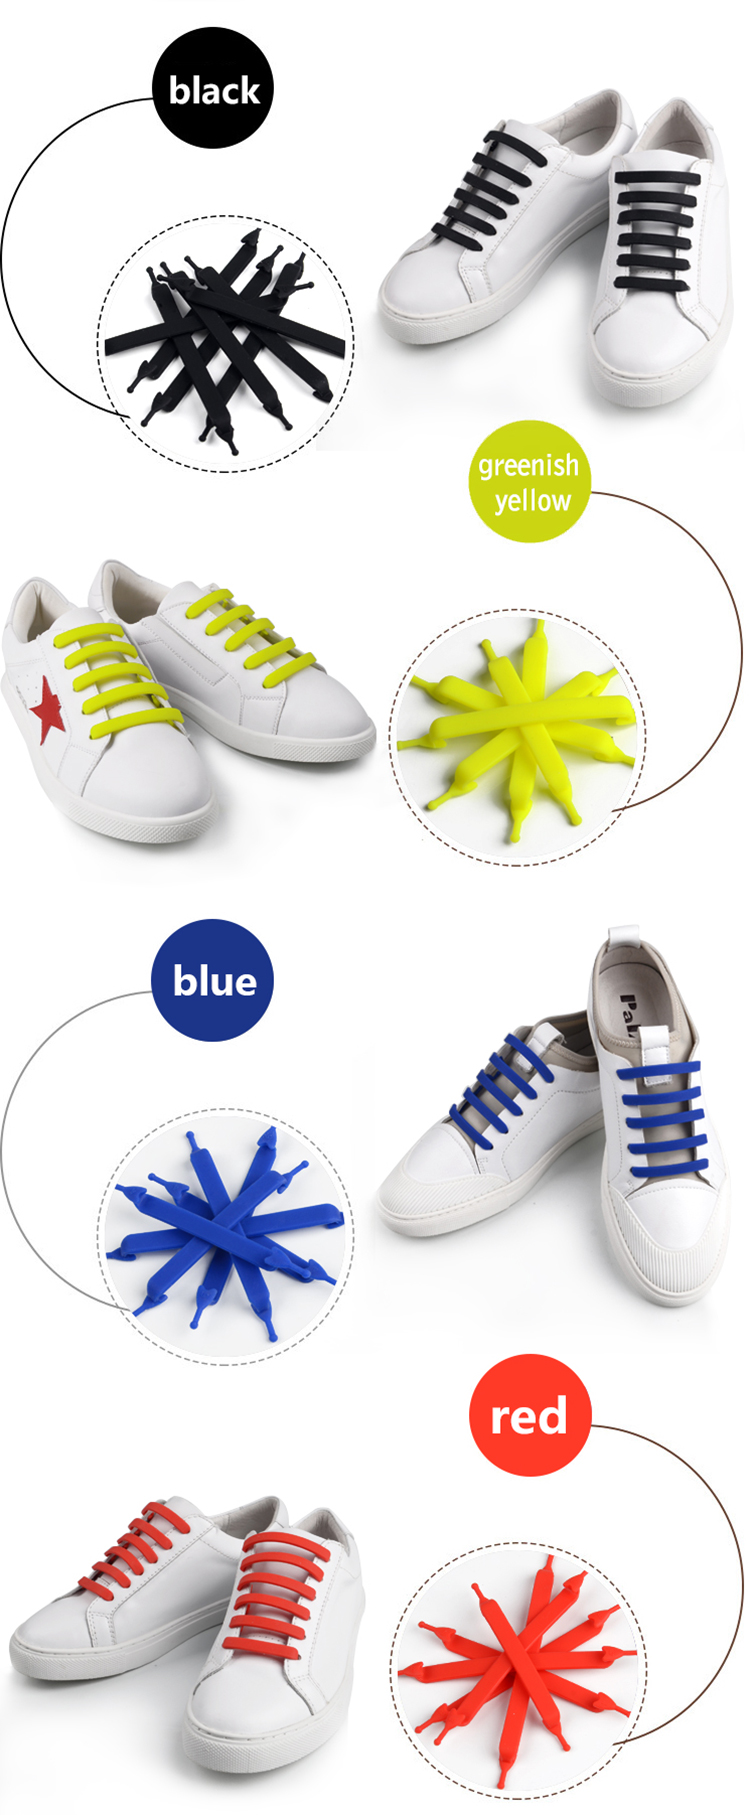  High Quality Silicone Shoelaces 13